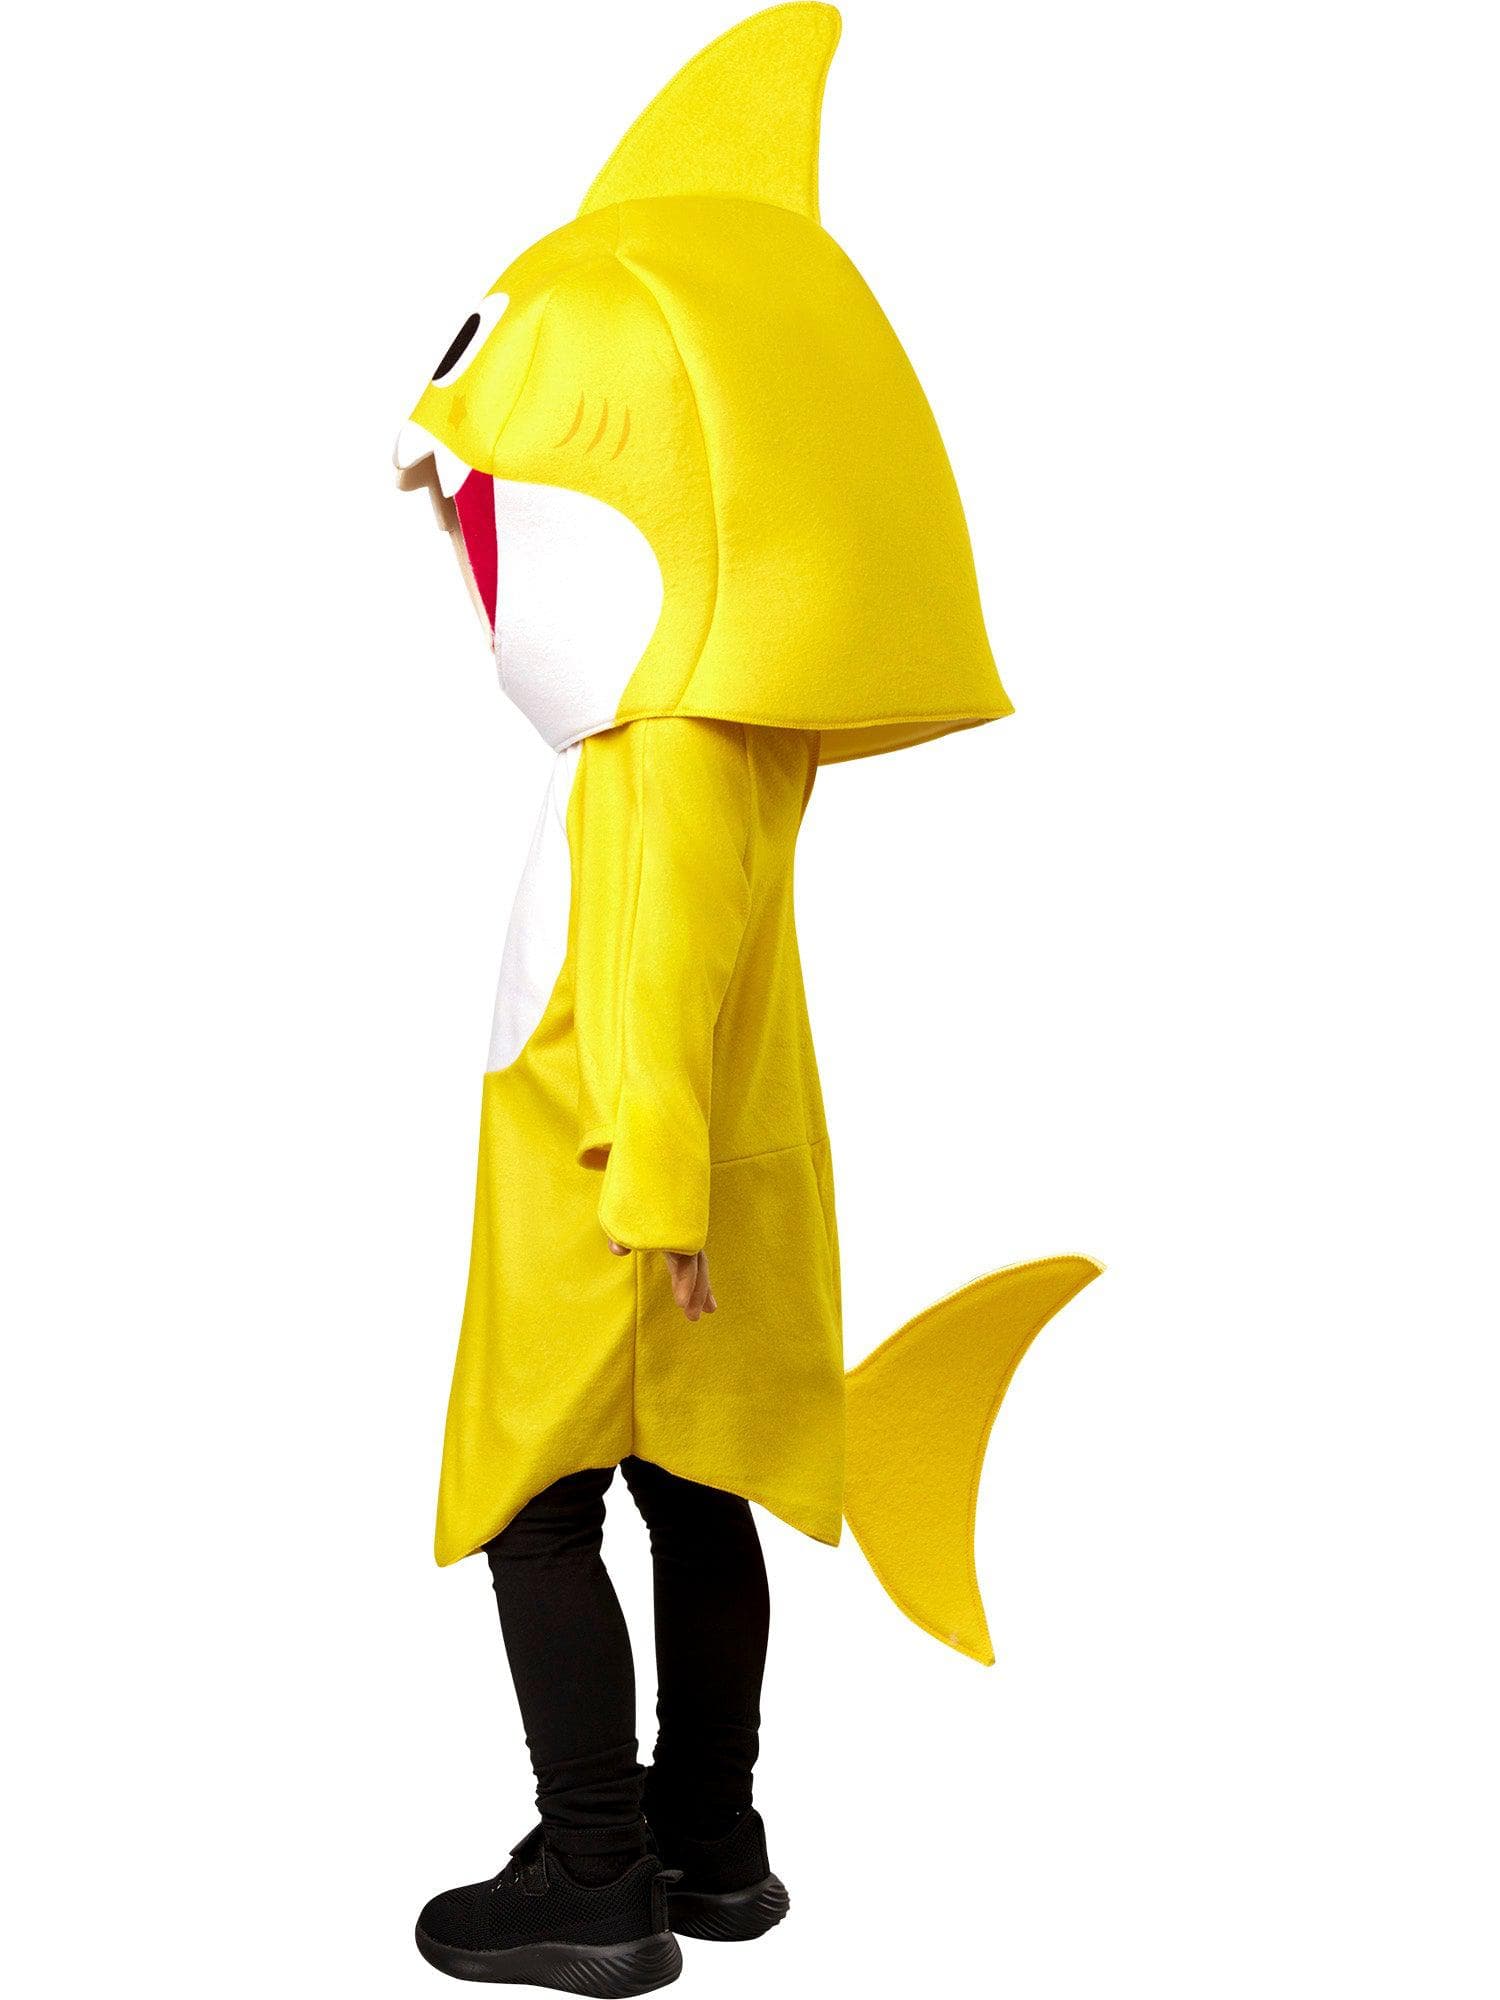 Baby Shark Tunic and Headpiece with Sound for Toddlers - costumes.com